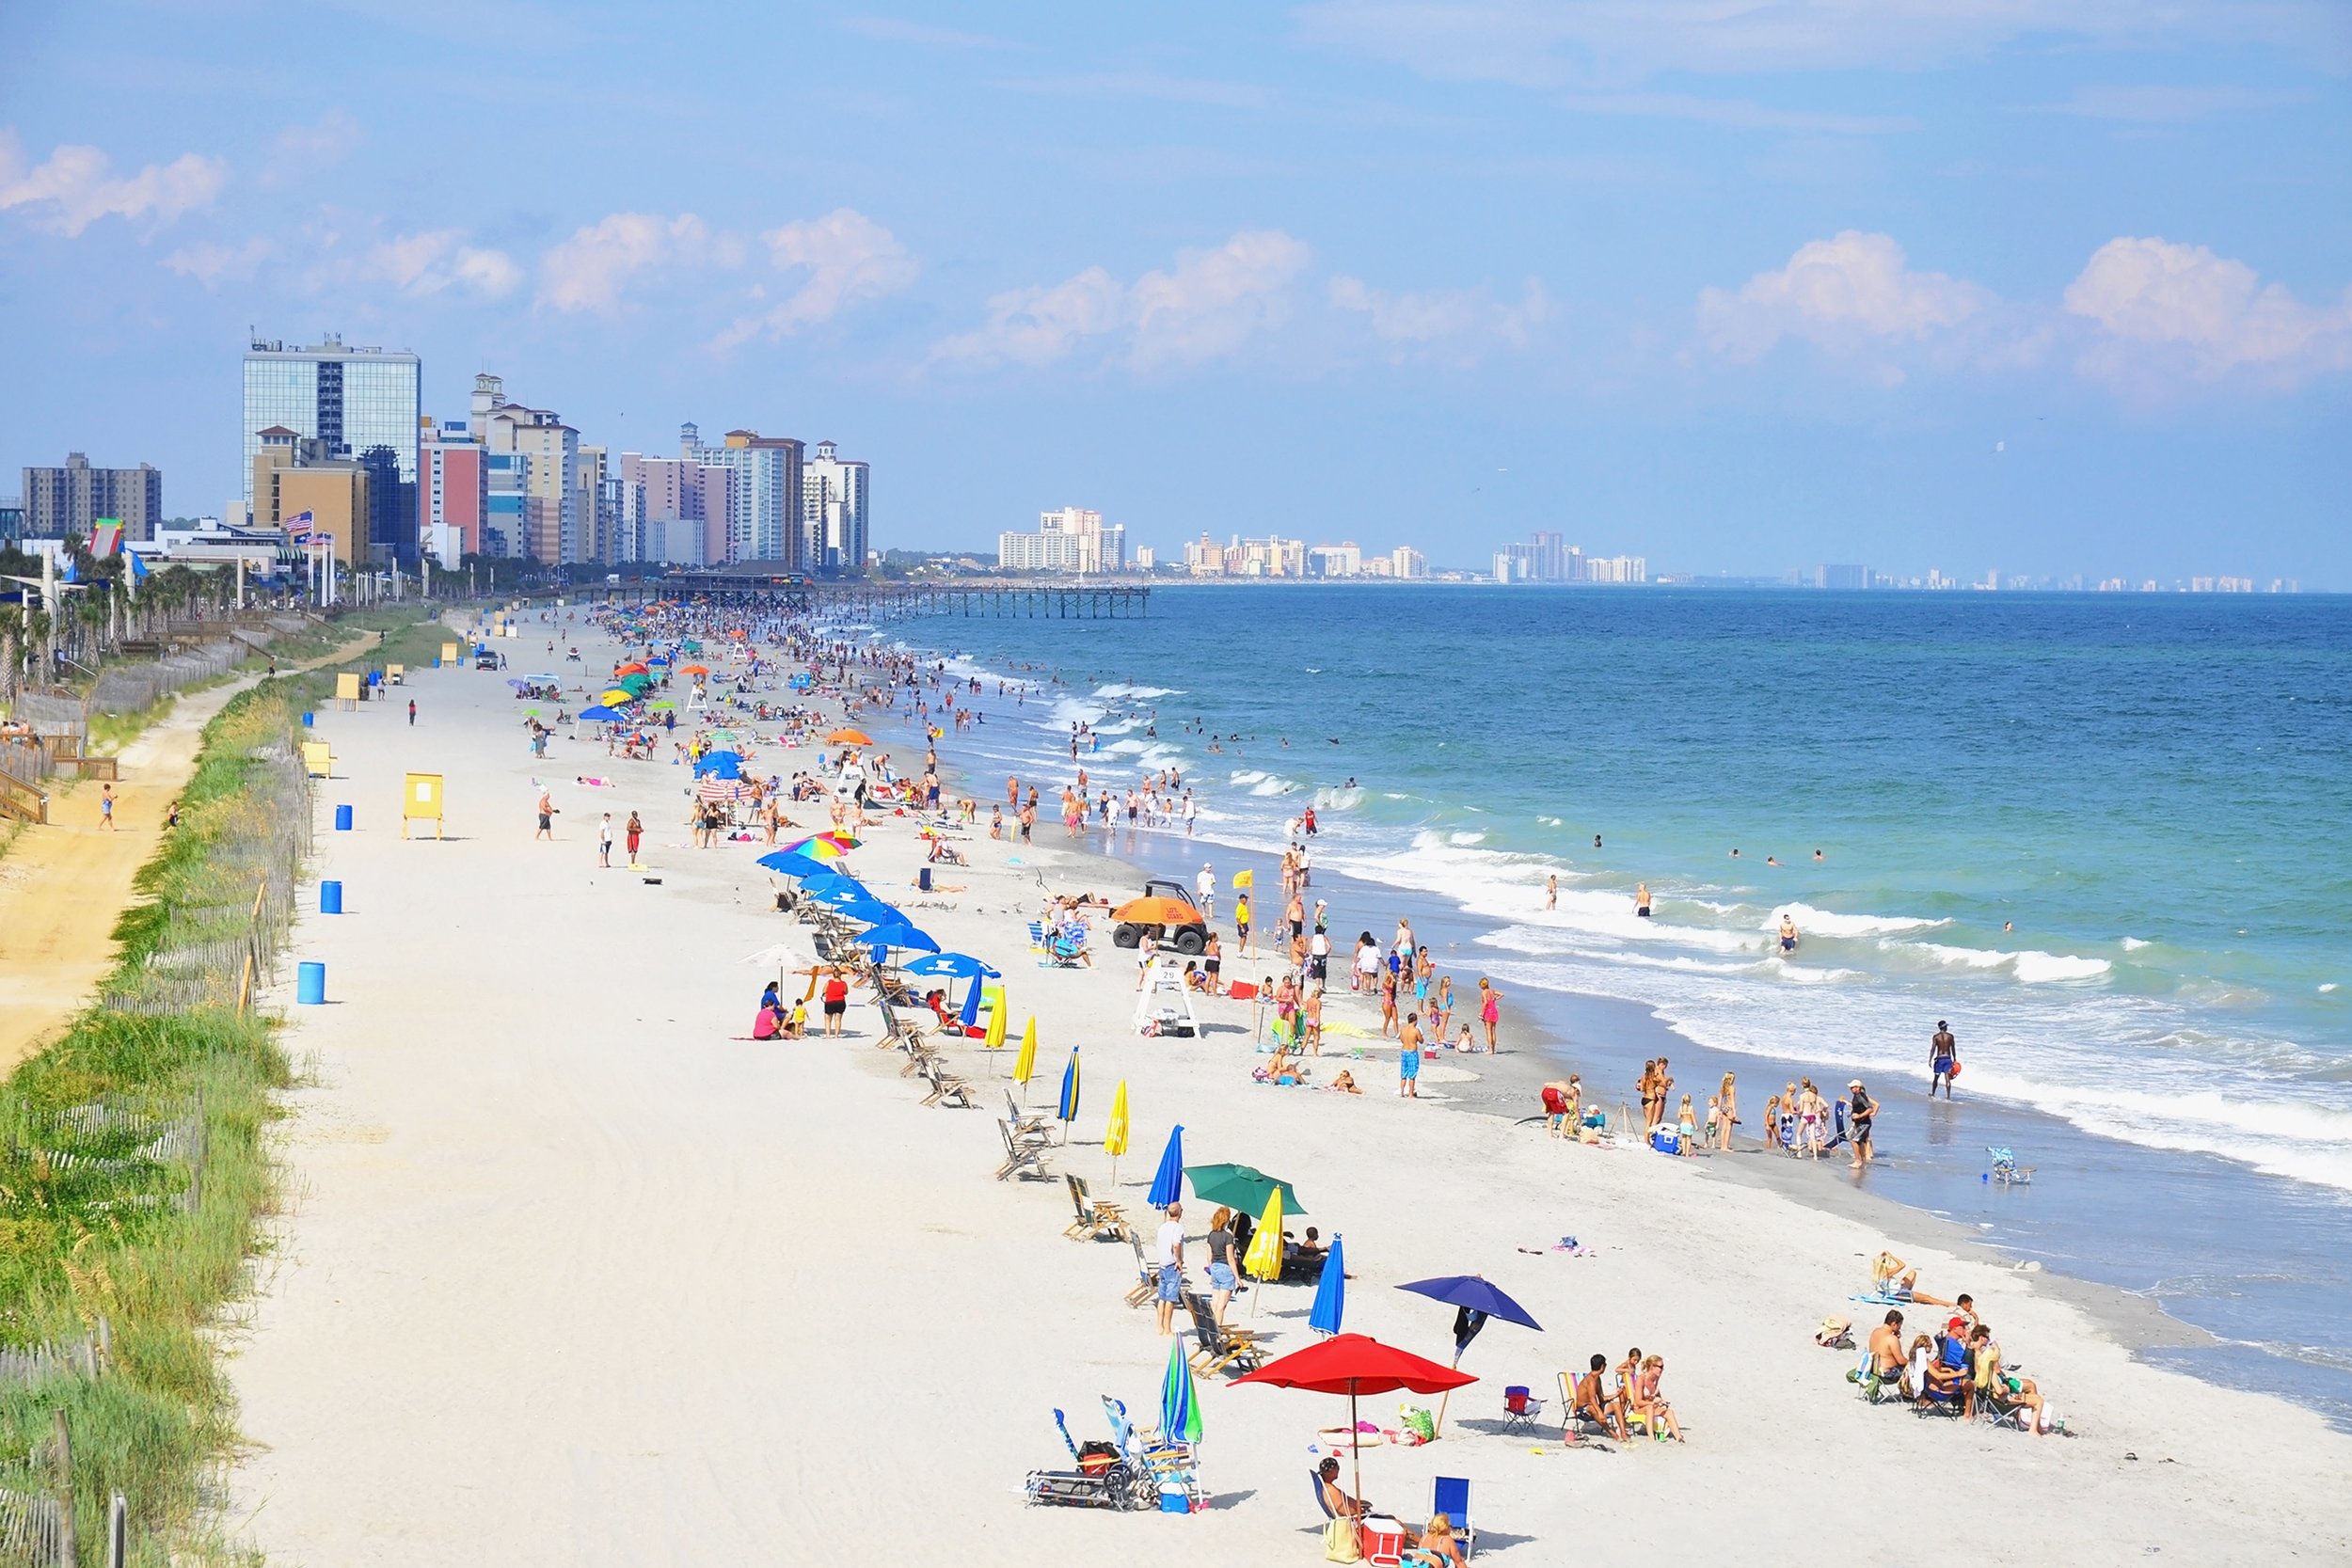 <p>At only 16.8 square miles, Myrtle Beach averages some 18.6 million visitors annually — talk about crowded. This coastal resort area is known for celebrity-designed golf courses, a boardwalk lined by arcades, and of course the beach, attracting enormous crowds starting in June when school is out. Try September or October instead.</p>